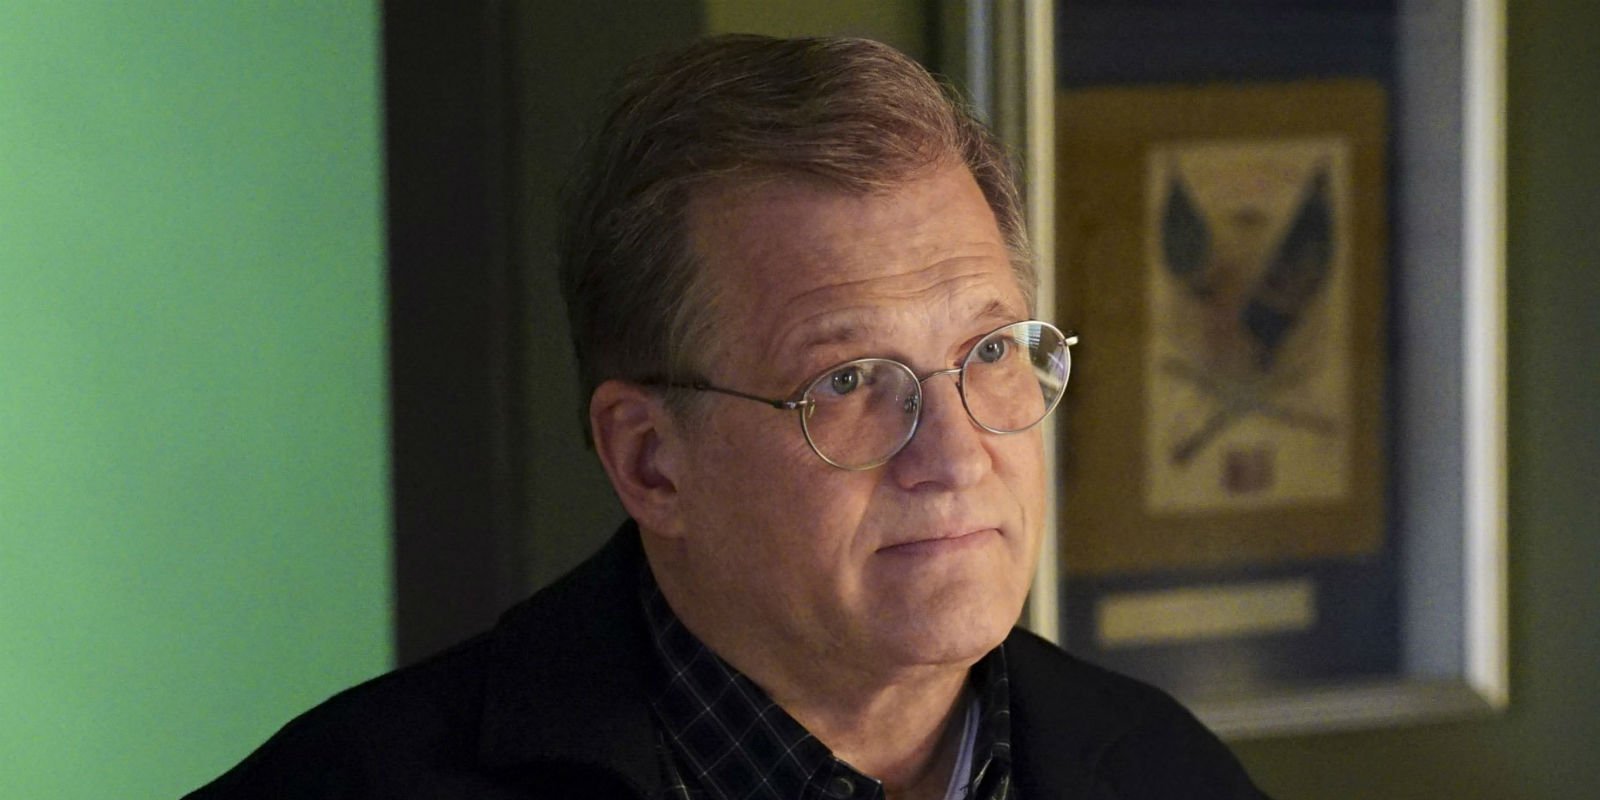 In a season 15 episode of NCIS Drew Carey had a rare dramatic role as a ret...